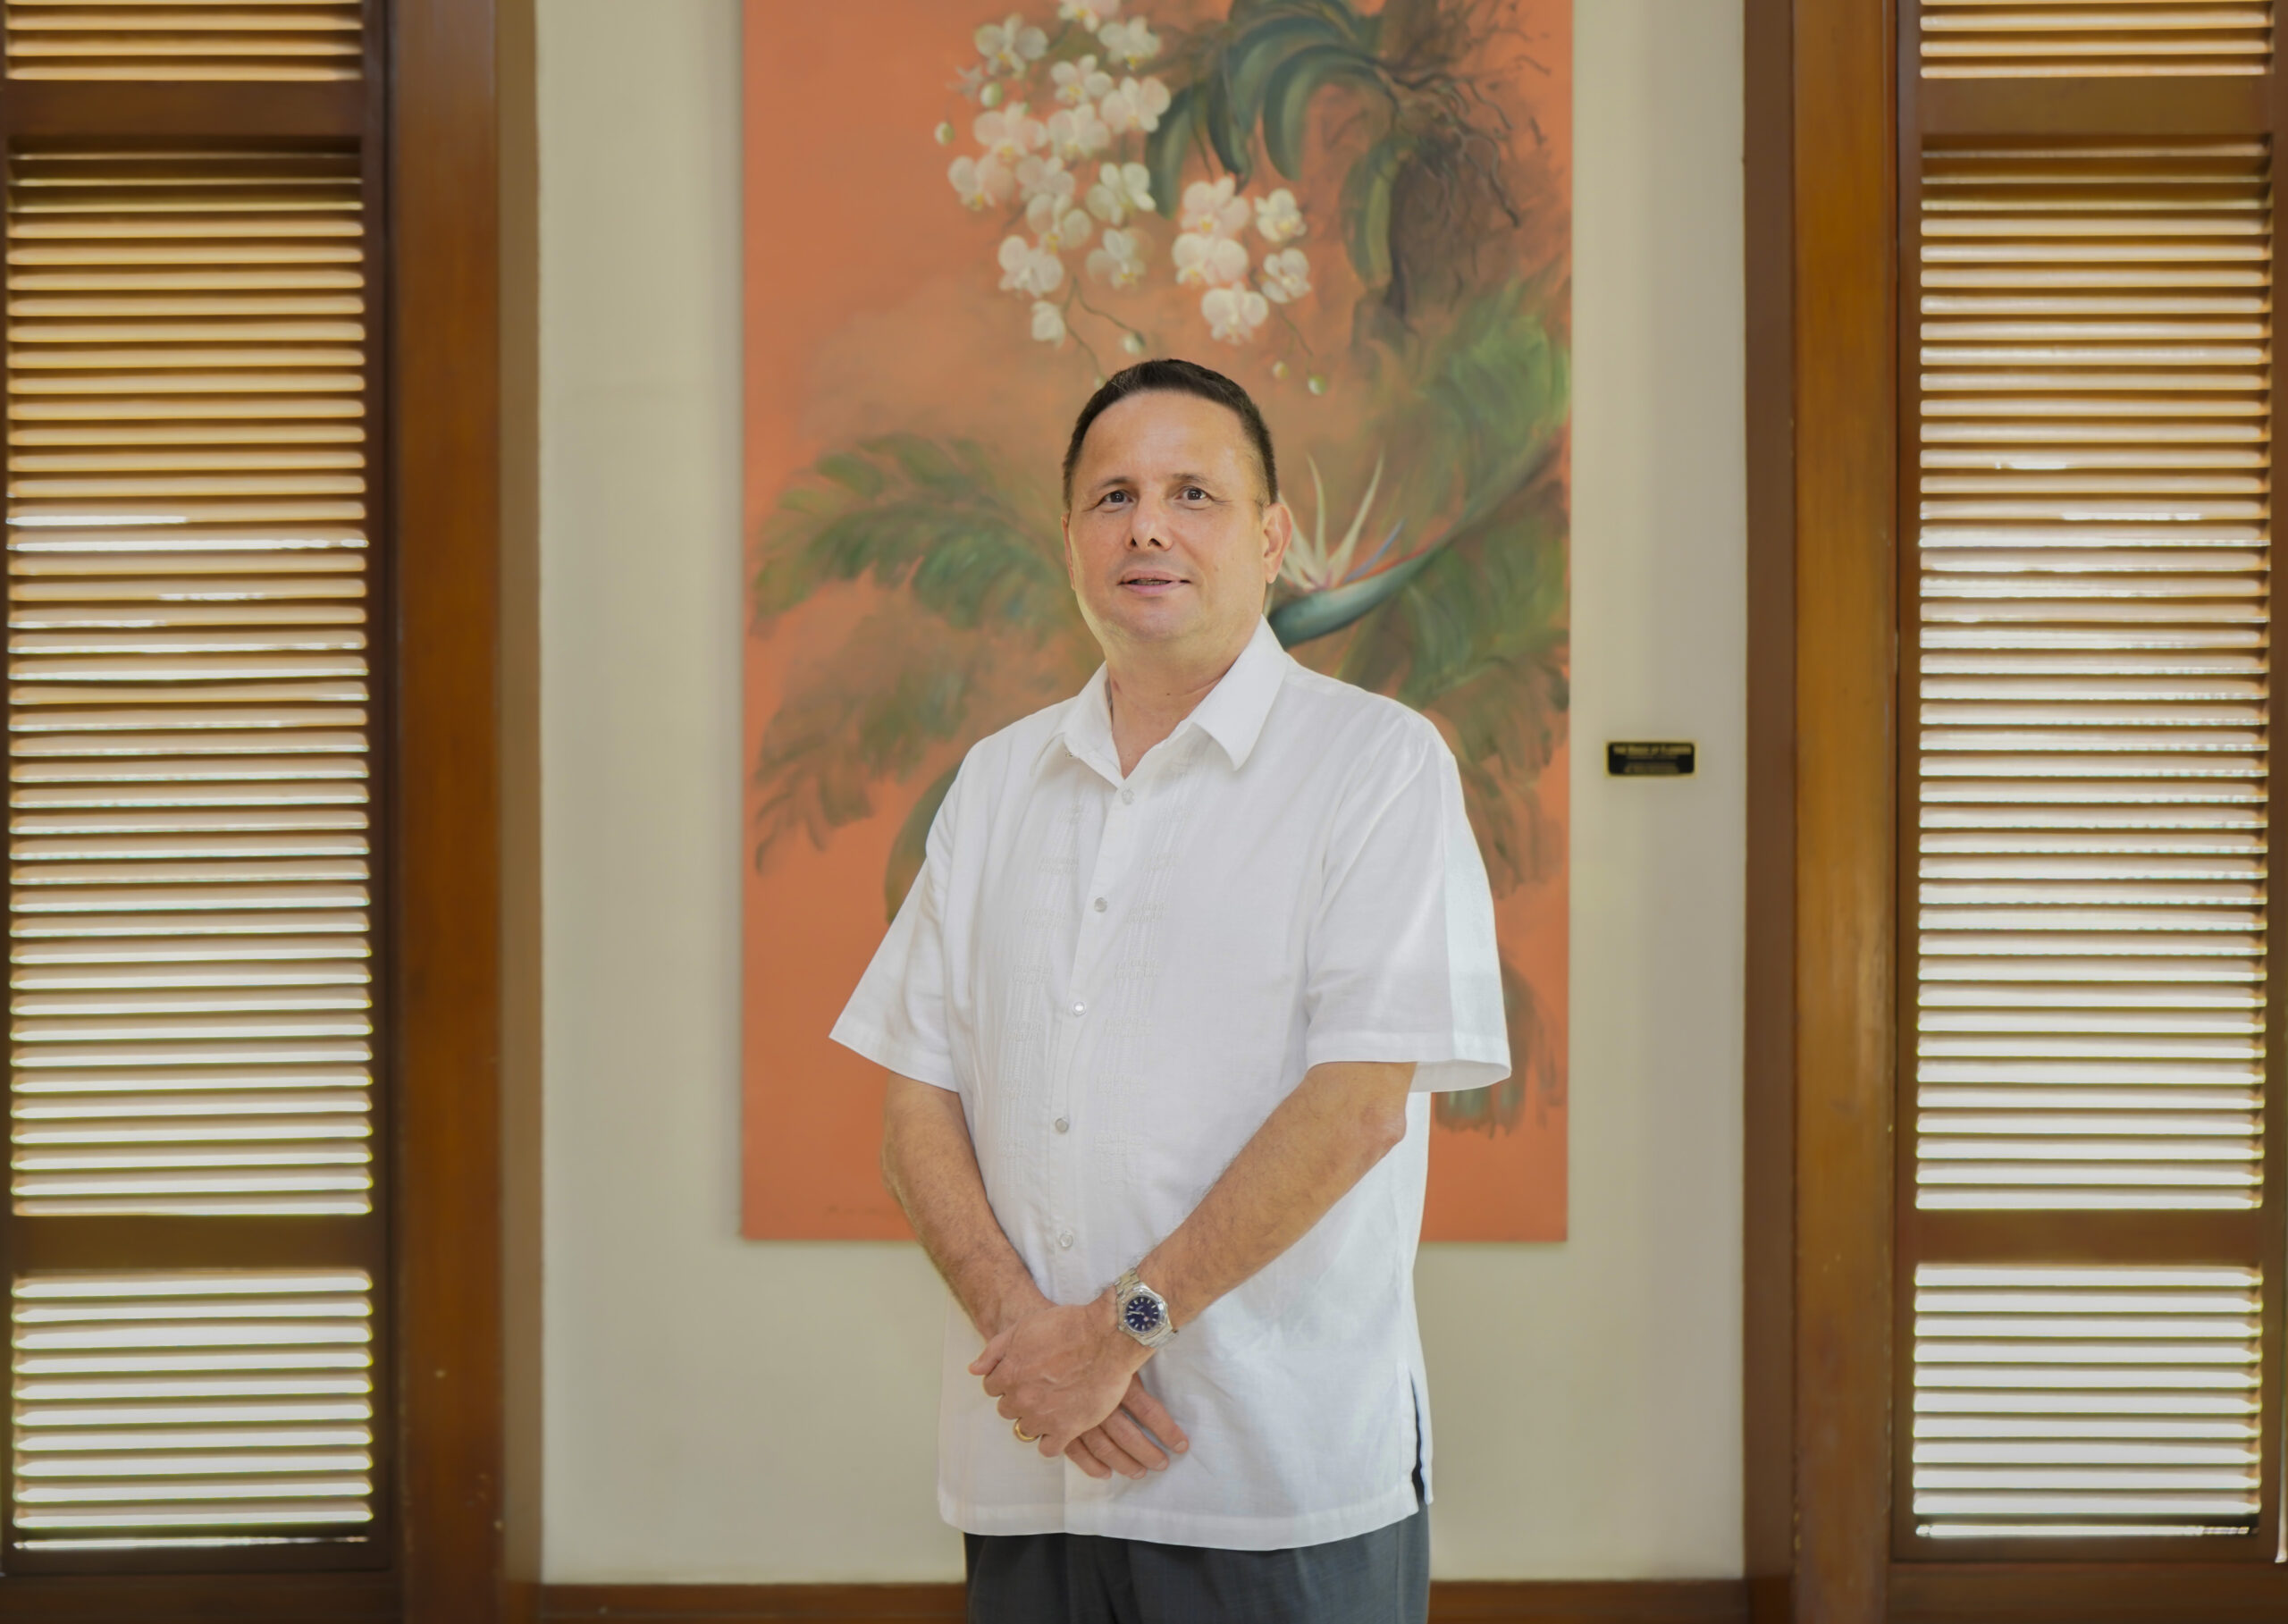 subic bay yacht club general manager